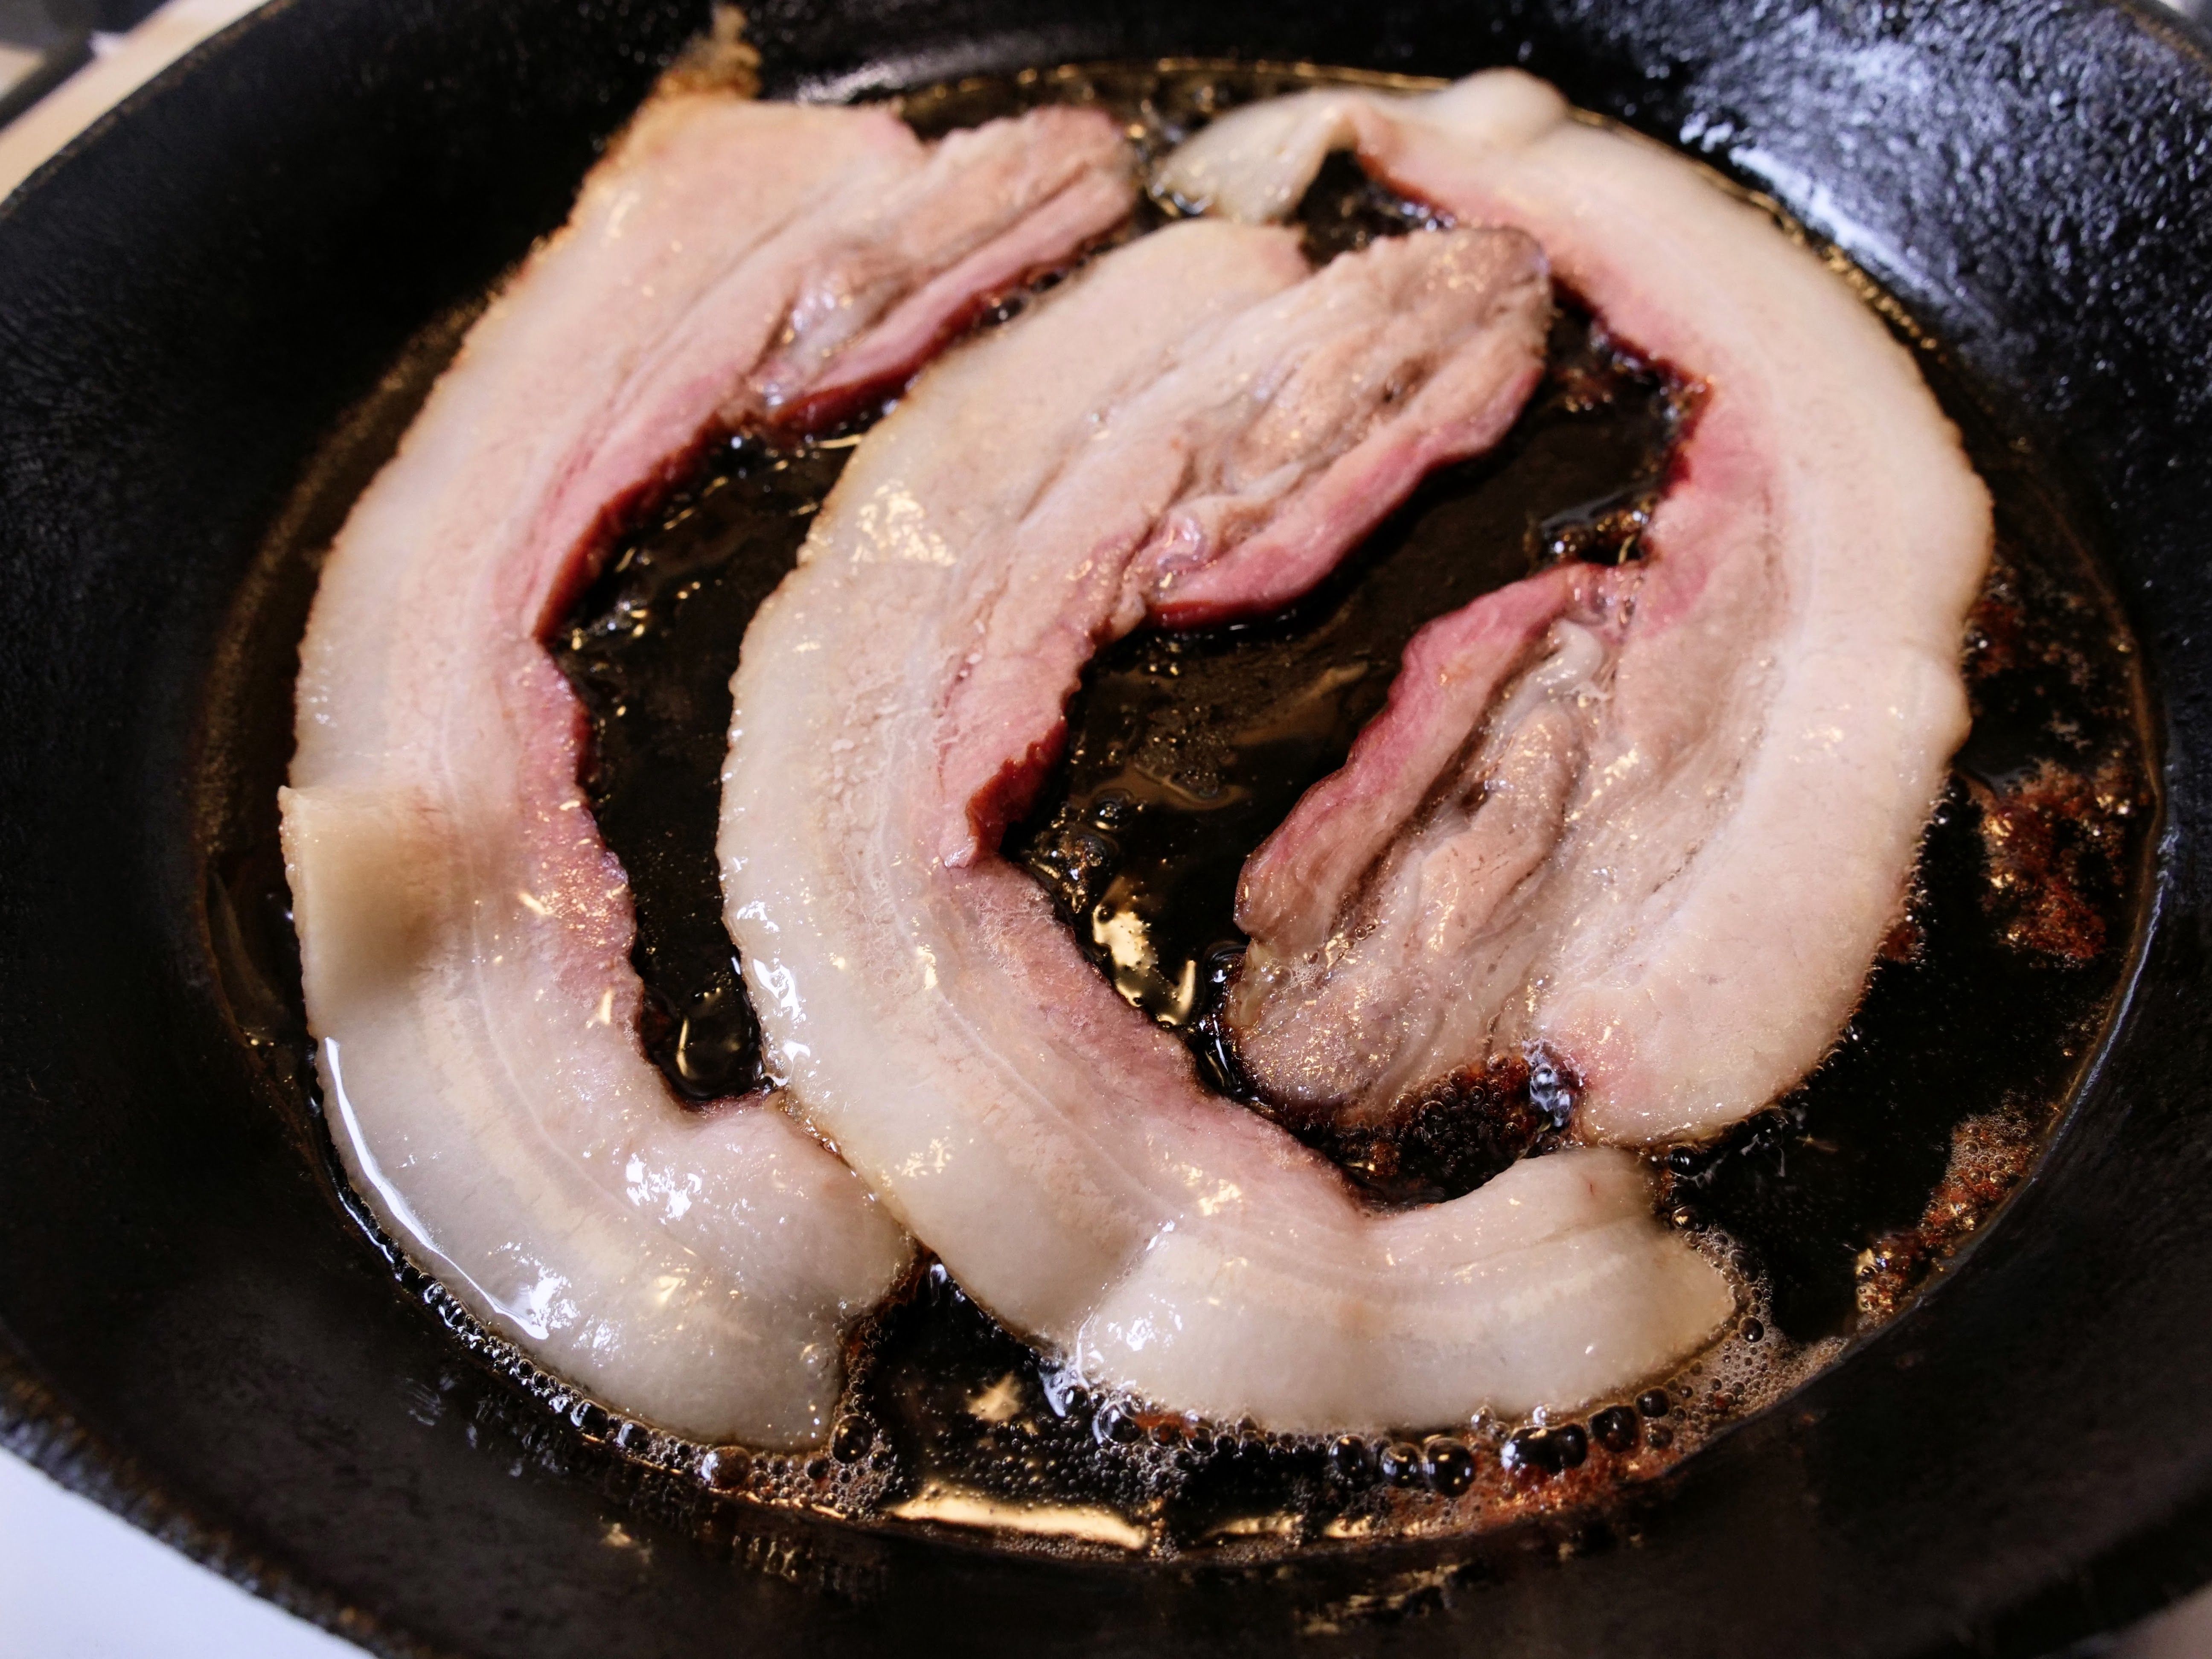 How To Cook Bacon On Stove Top